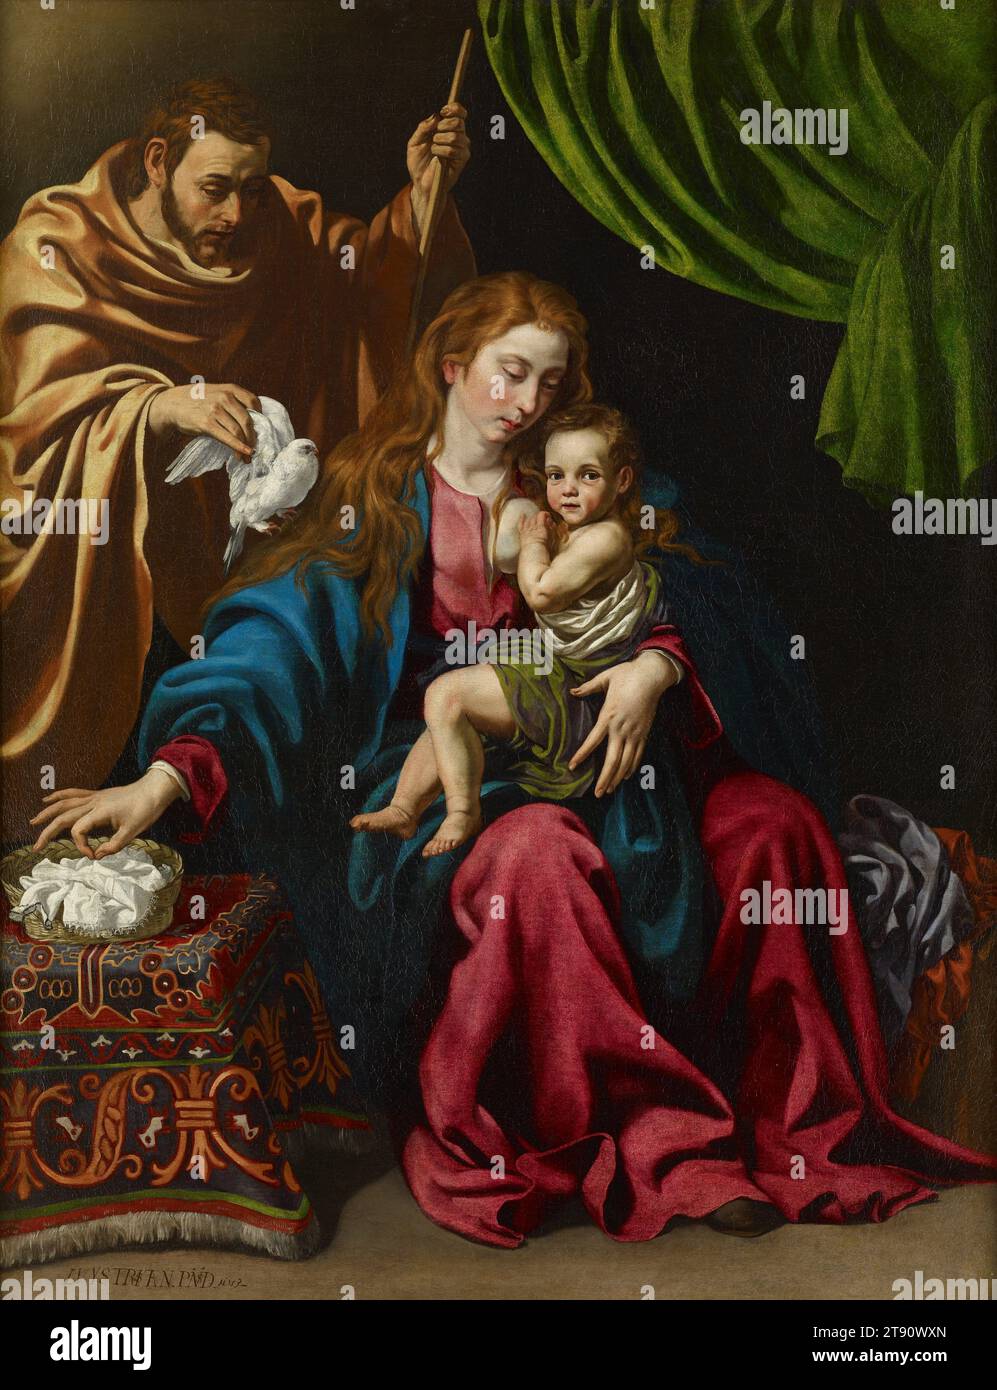 Holy Family, 1613, Luis Tristán, Spanish, 1586–1640, 56 x 43 in. (142.24 x 109.22 cm) (canvas)73 1/2 x 61 1/4 x 3 3/8 in. (186.69 x 155.58 x 8.57 cm) (outer frame), Oil on canvas, Spain, 17th century, With intense realism, and not-so-subtle symbolism, the Holy Family (Mary, Joseph, and Jesus) is caught in a very intimate moment. The young parents are cuddling their child, who for a moment stops suckling and stares at the beholder, heedless of the dove the father is showing him, which alludes to the Holy Spirit. The figures’ grave expressions anticipate the tragedy to come. Stock Photo